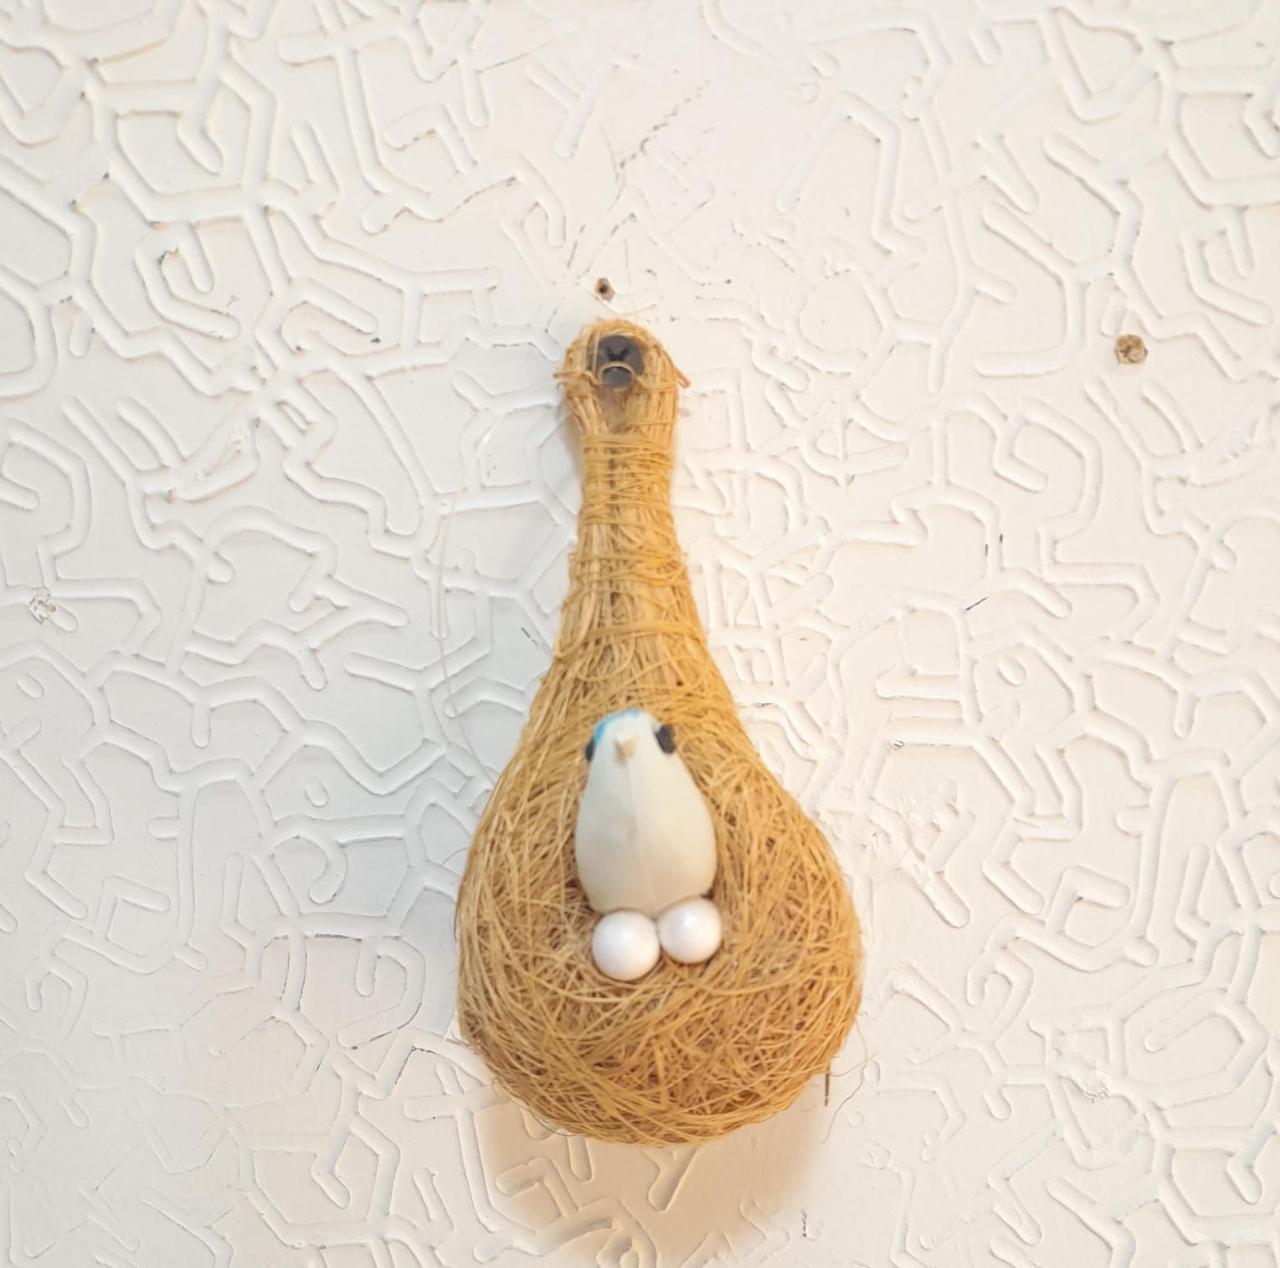 Bird Nest Hanging Attractive Garden & Home Decoration Made in India By Tamrapatra